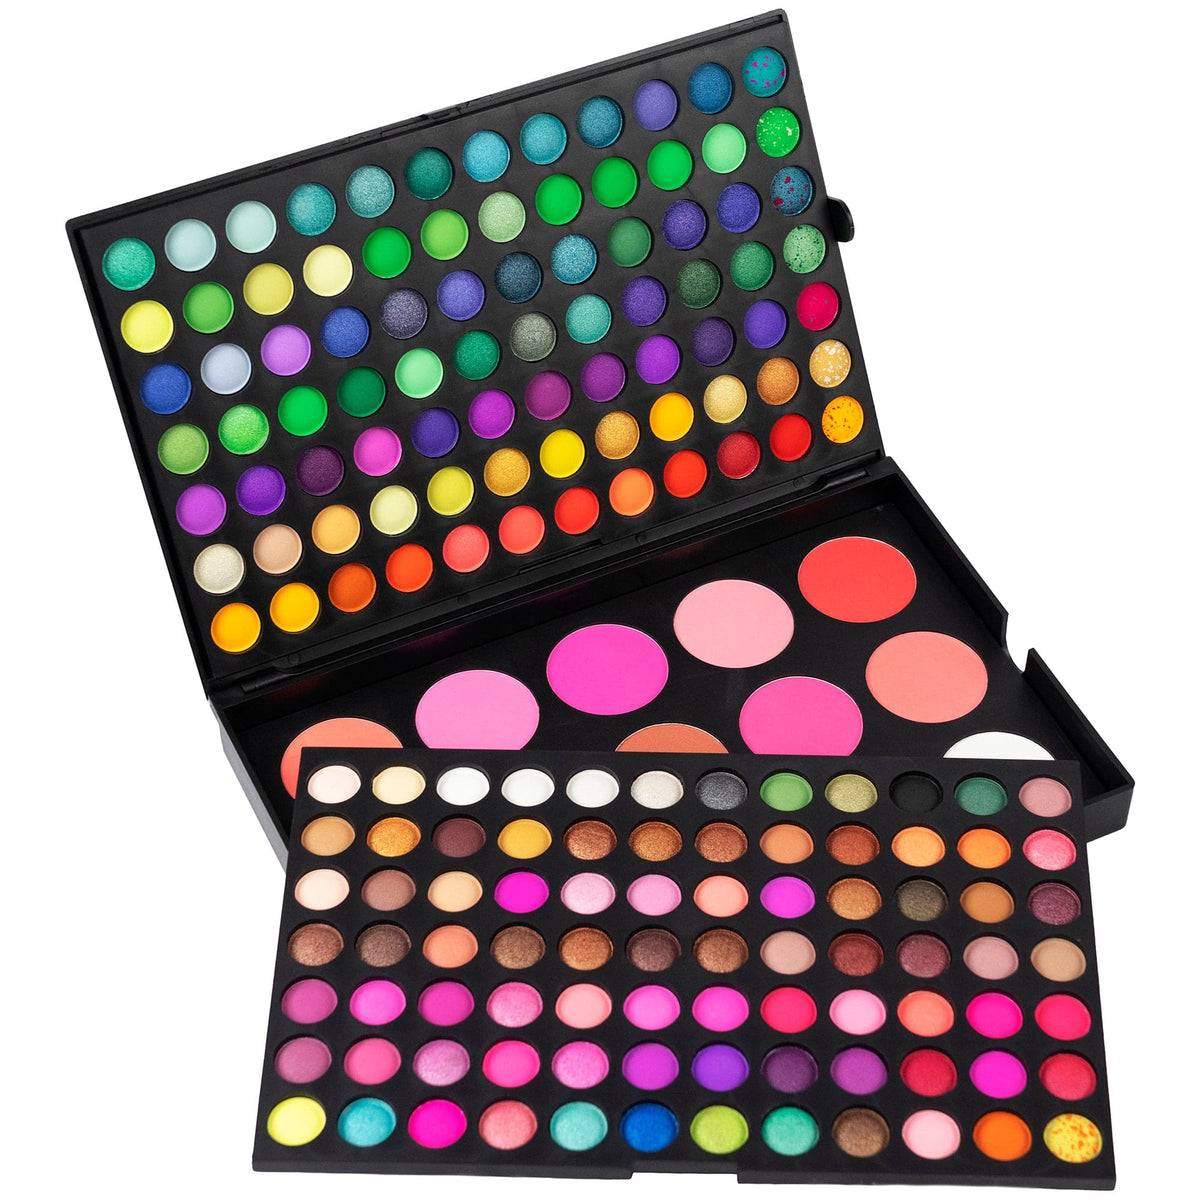 LaRoc Makeup Eyeshadow Palette/Makeup Palette Set of 120 Colours in  Neutral, Bold, and Bright Eyeshadow Palettes, Summer Tones Make Up Palette,  High